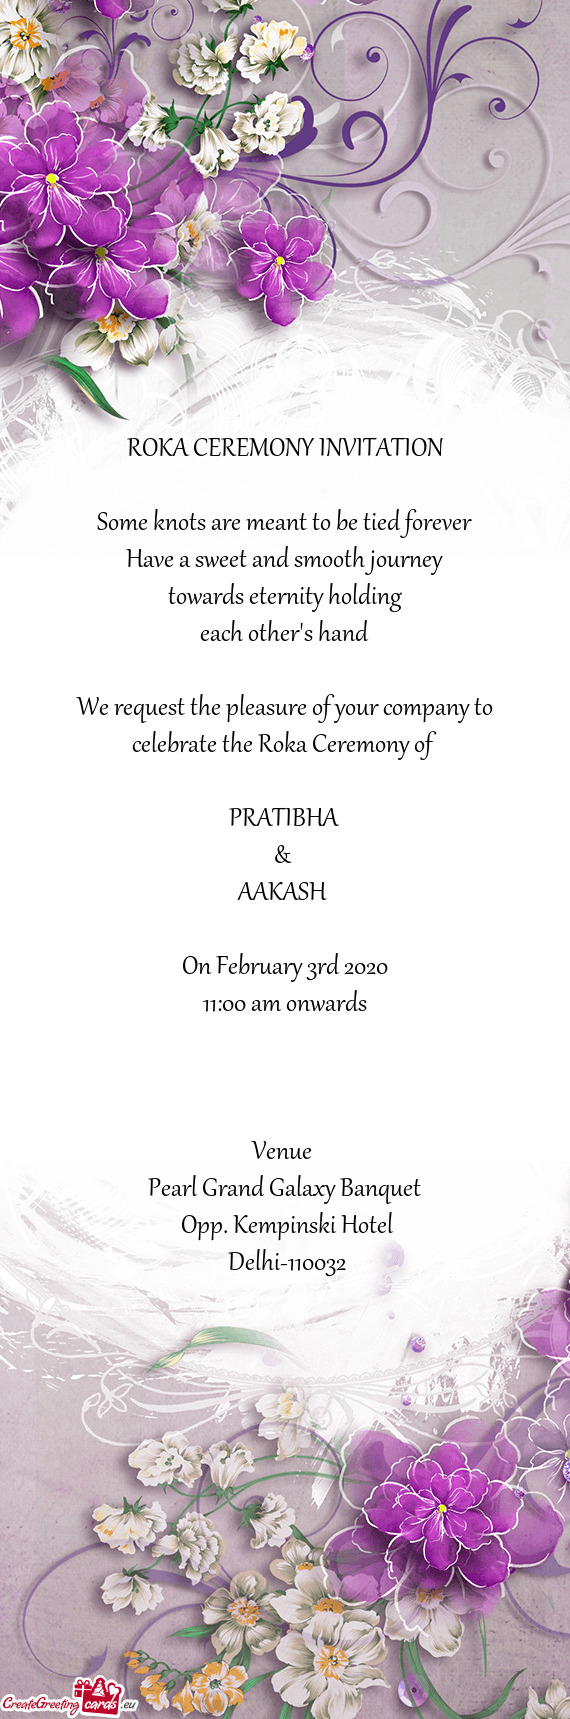 ROKA CEREMONY INVITATION
 
 Some knots are meant to be tied forever
 Have a sweet and smooth journey